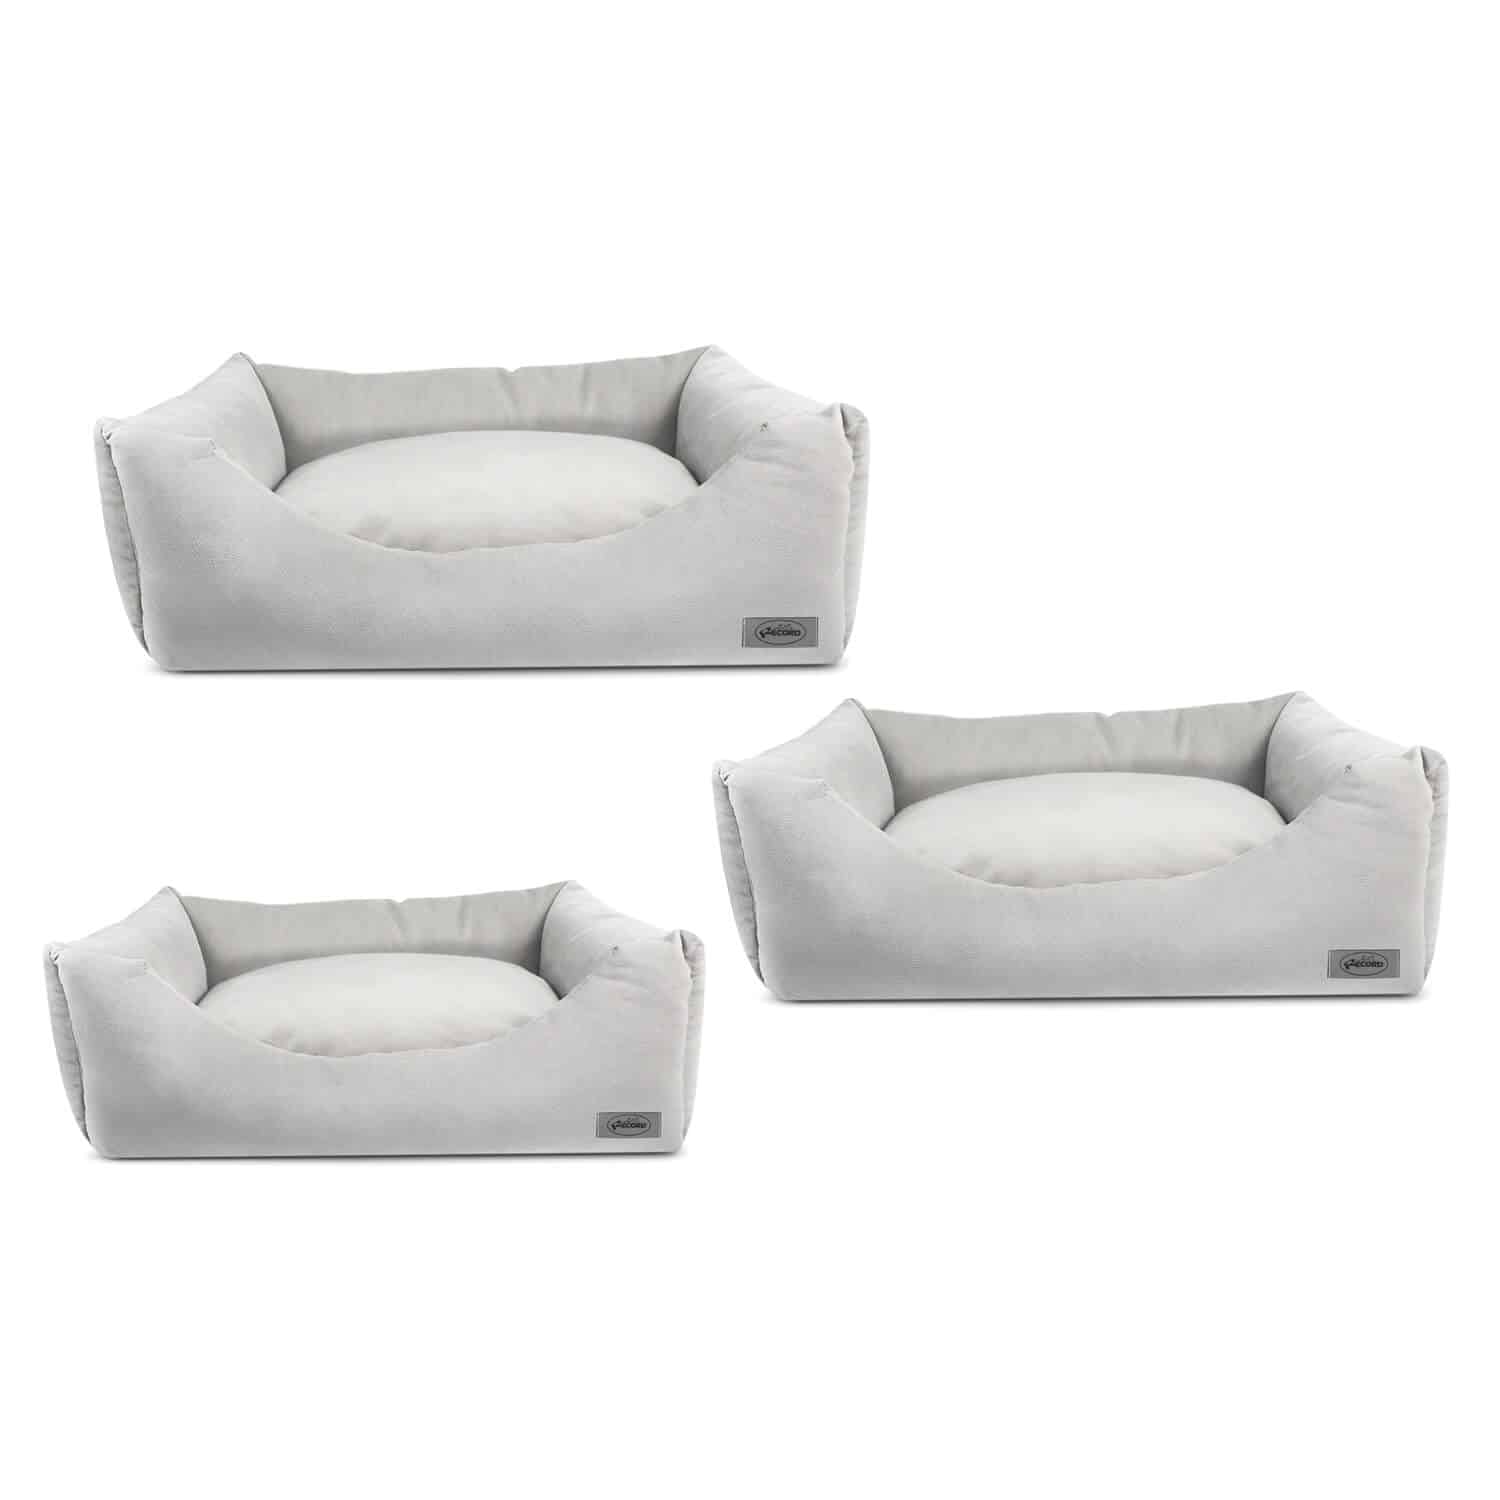 Soft Dog Bed | Record Vincent Bed Quality Breathable Soft Comfortable Washable